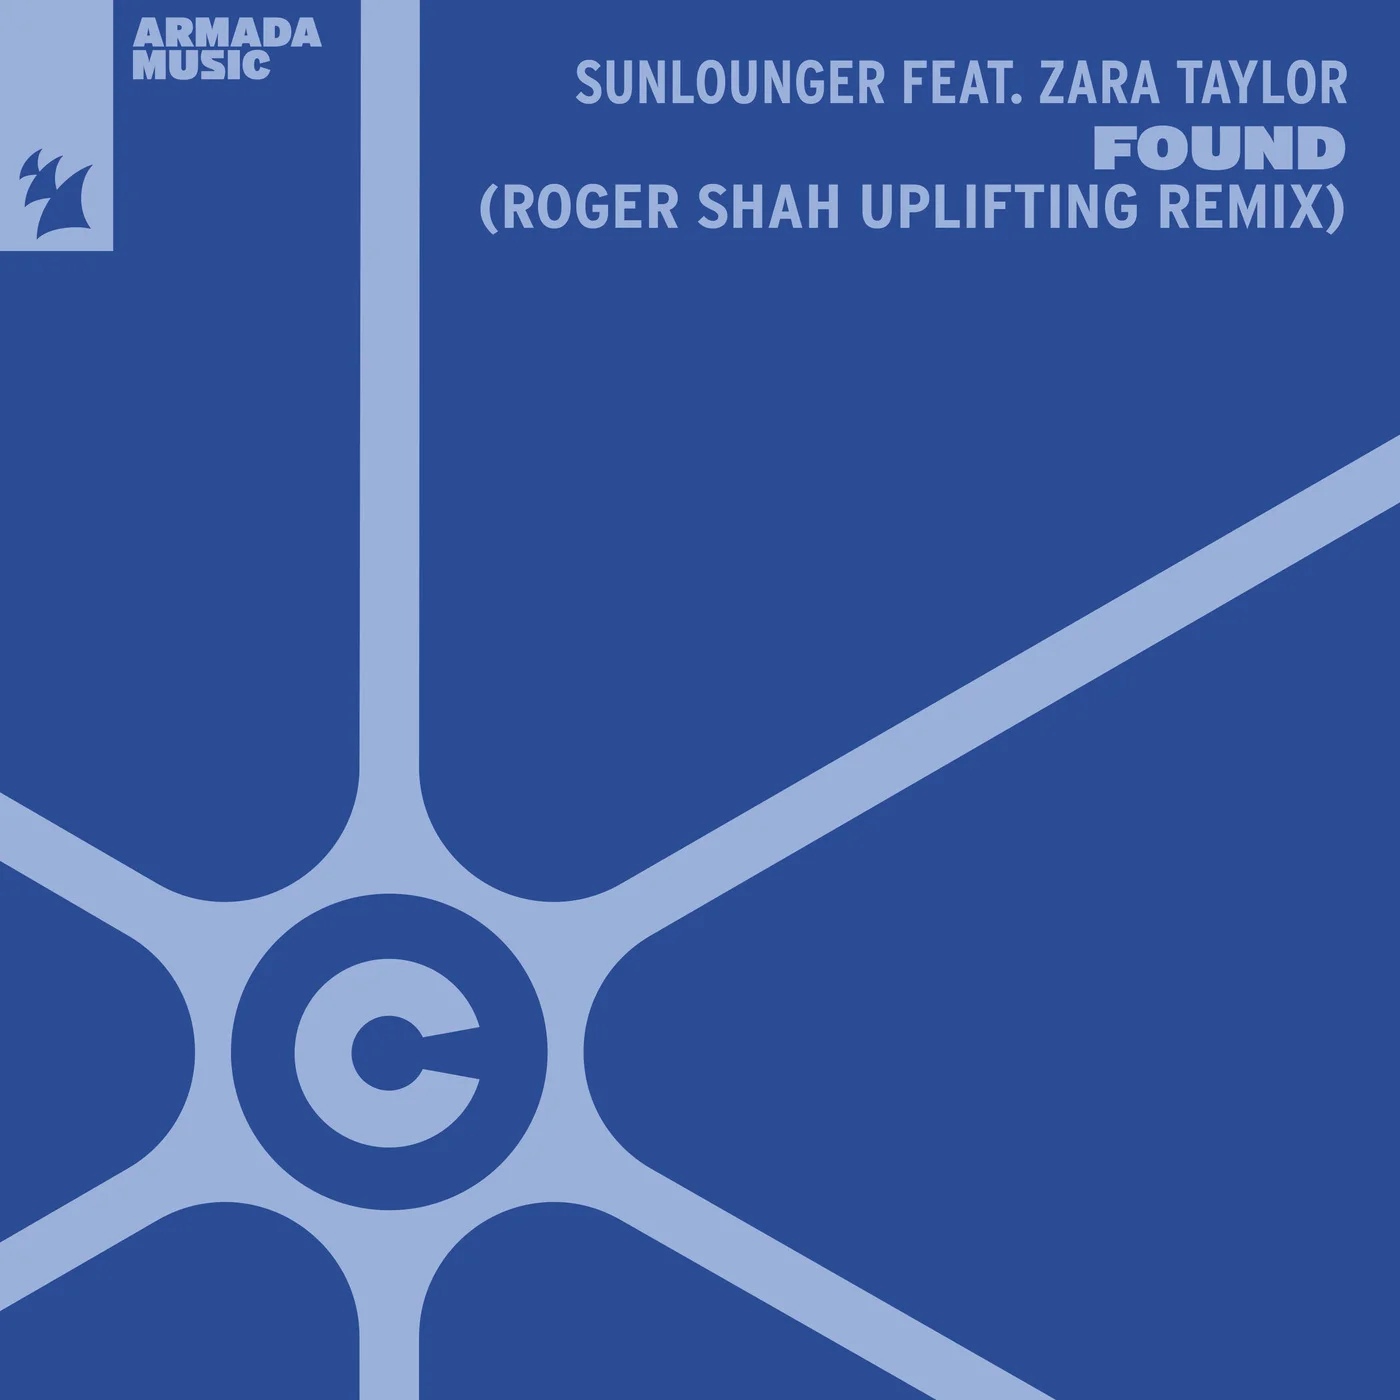 Sunlounger featuring Zara Taylor — Found (Roger Shah Uplifting Remix) cover artwork